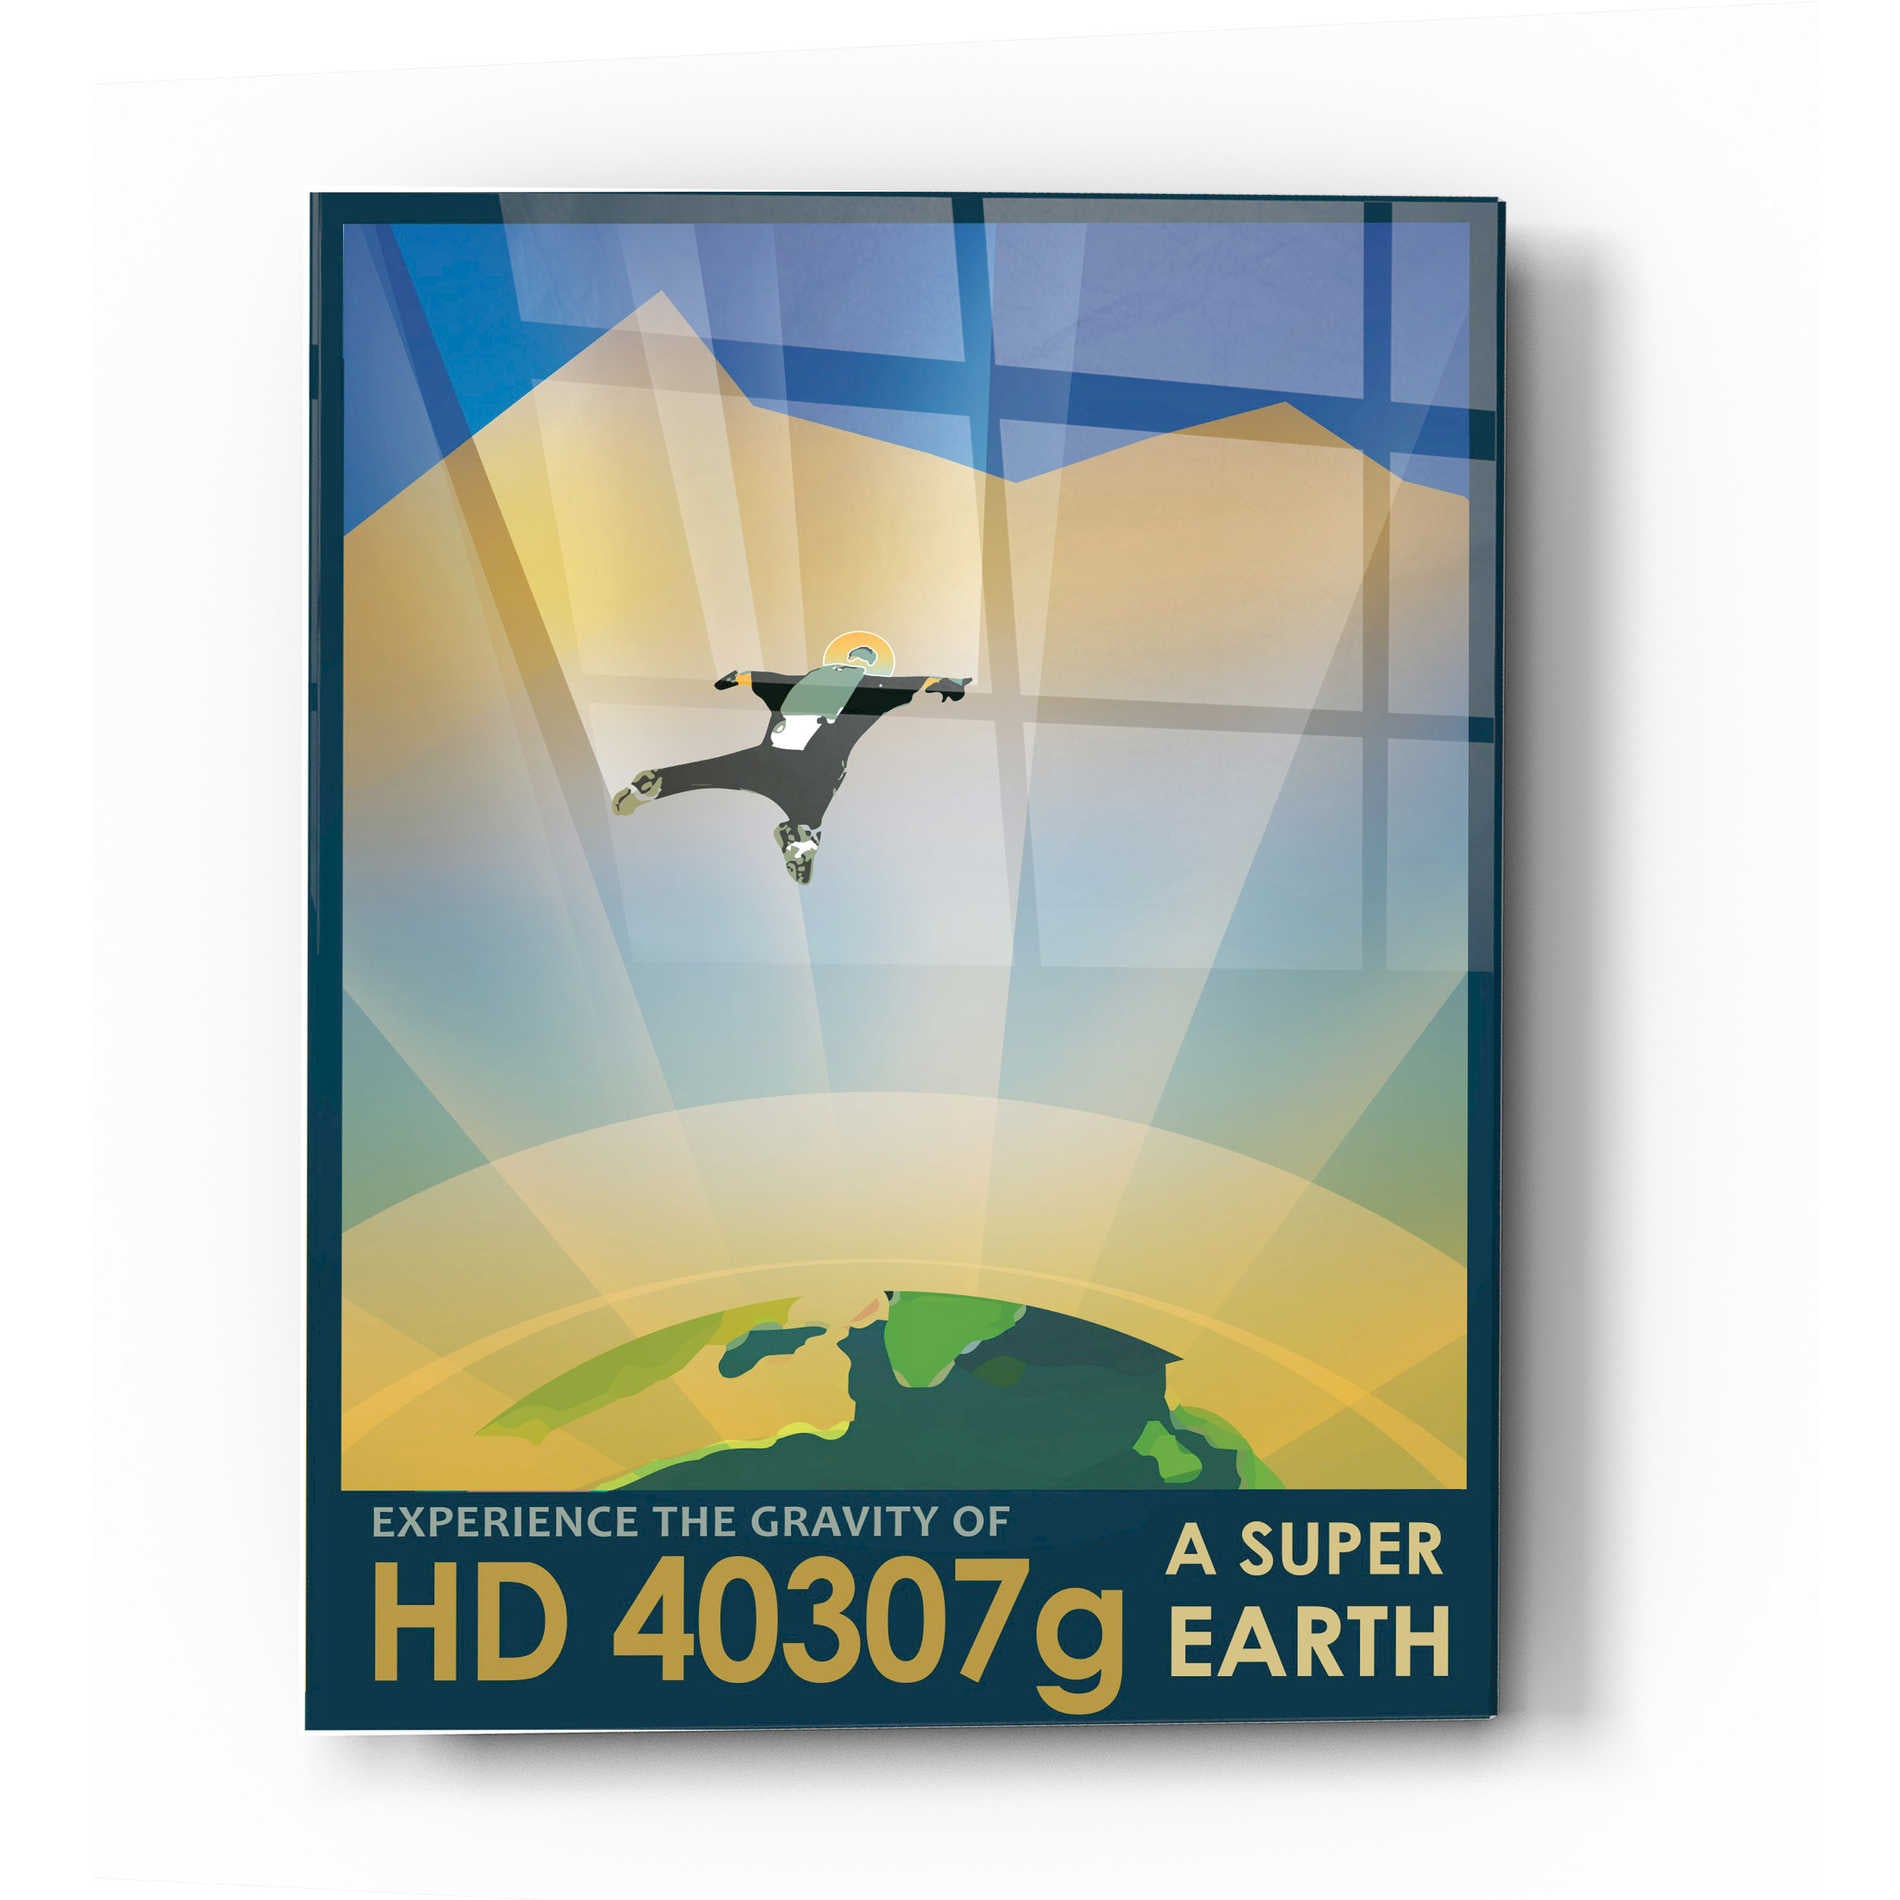 Epic Art 'Visions of the Future: HD 40307g' Acrylic Glass Wall Art,12x16